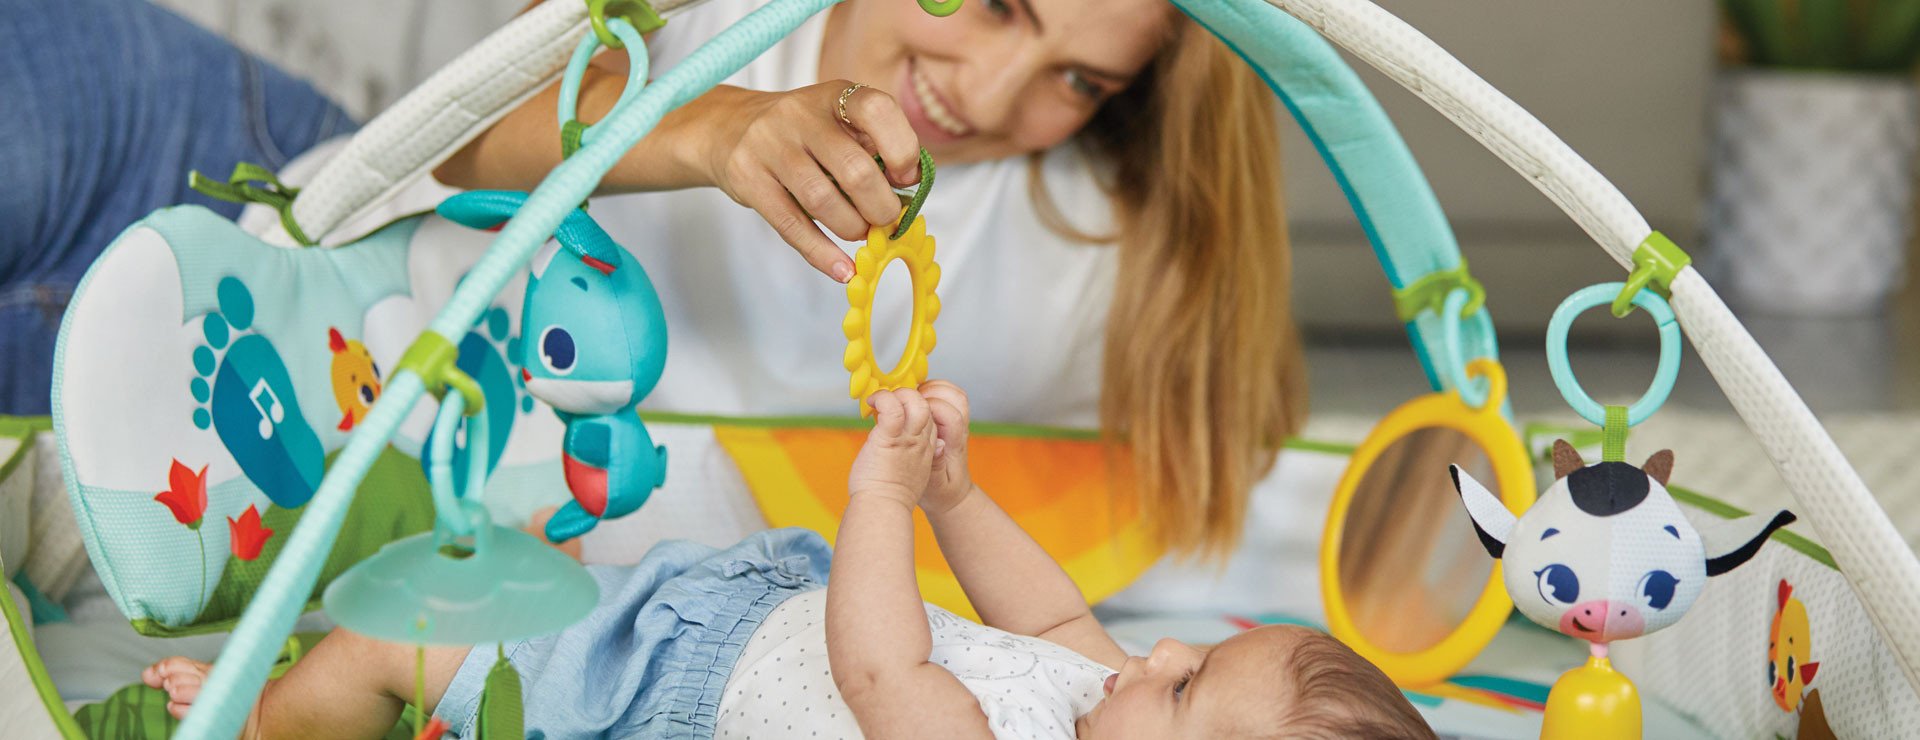   Comfortably play and bond with your baby while fostering language skills